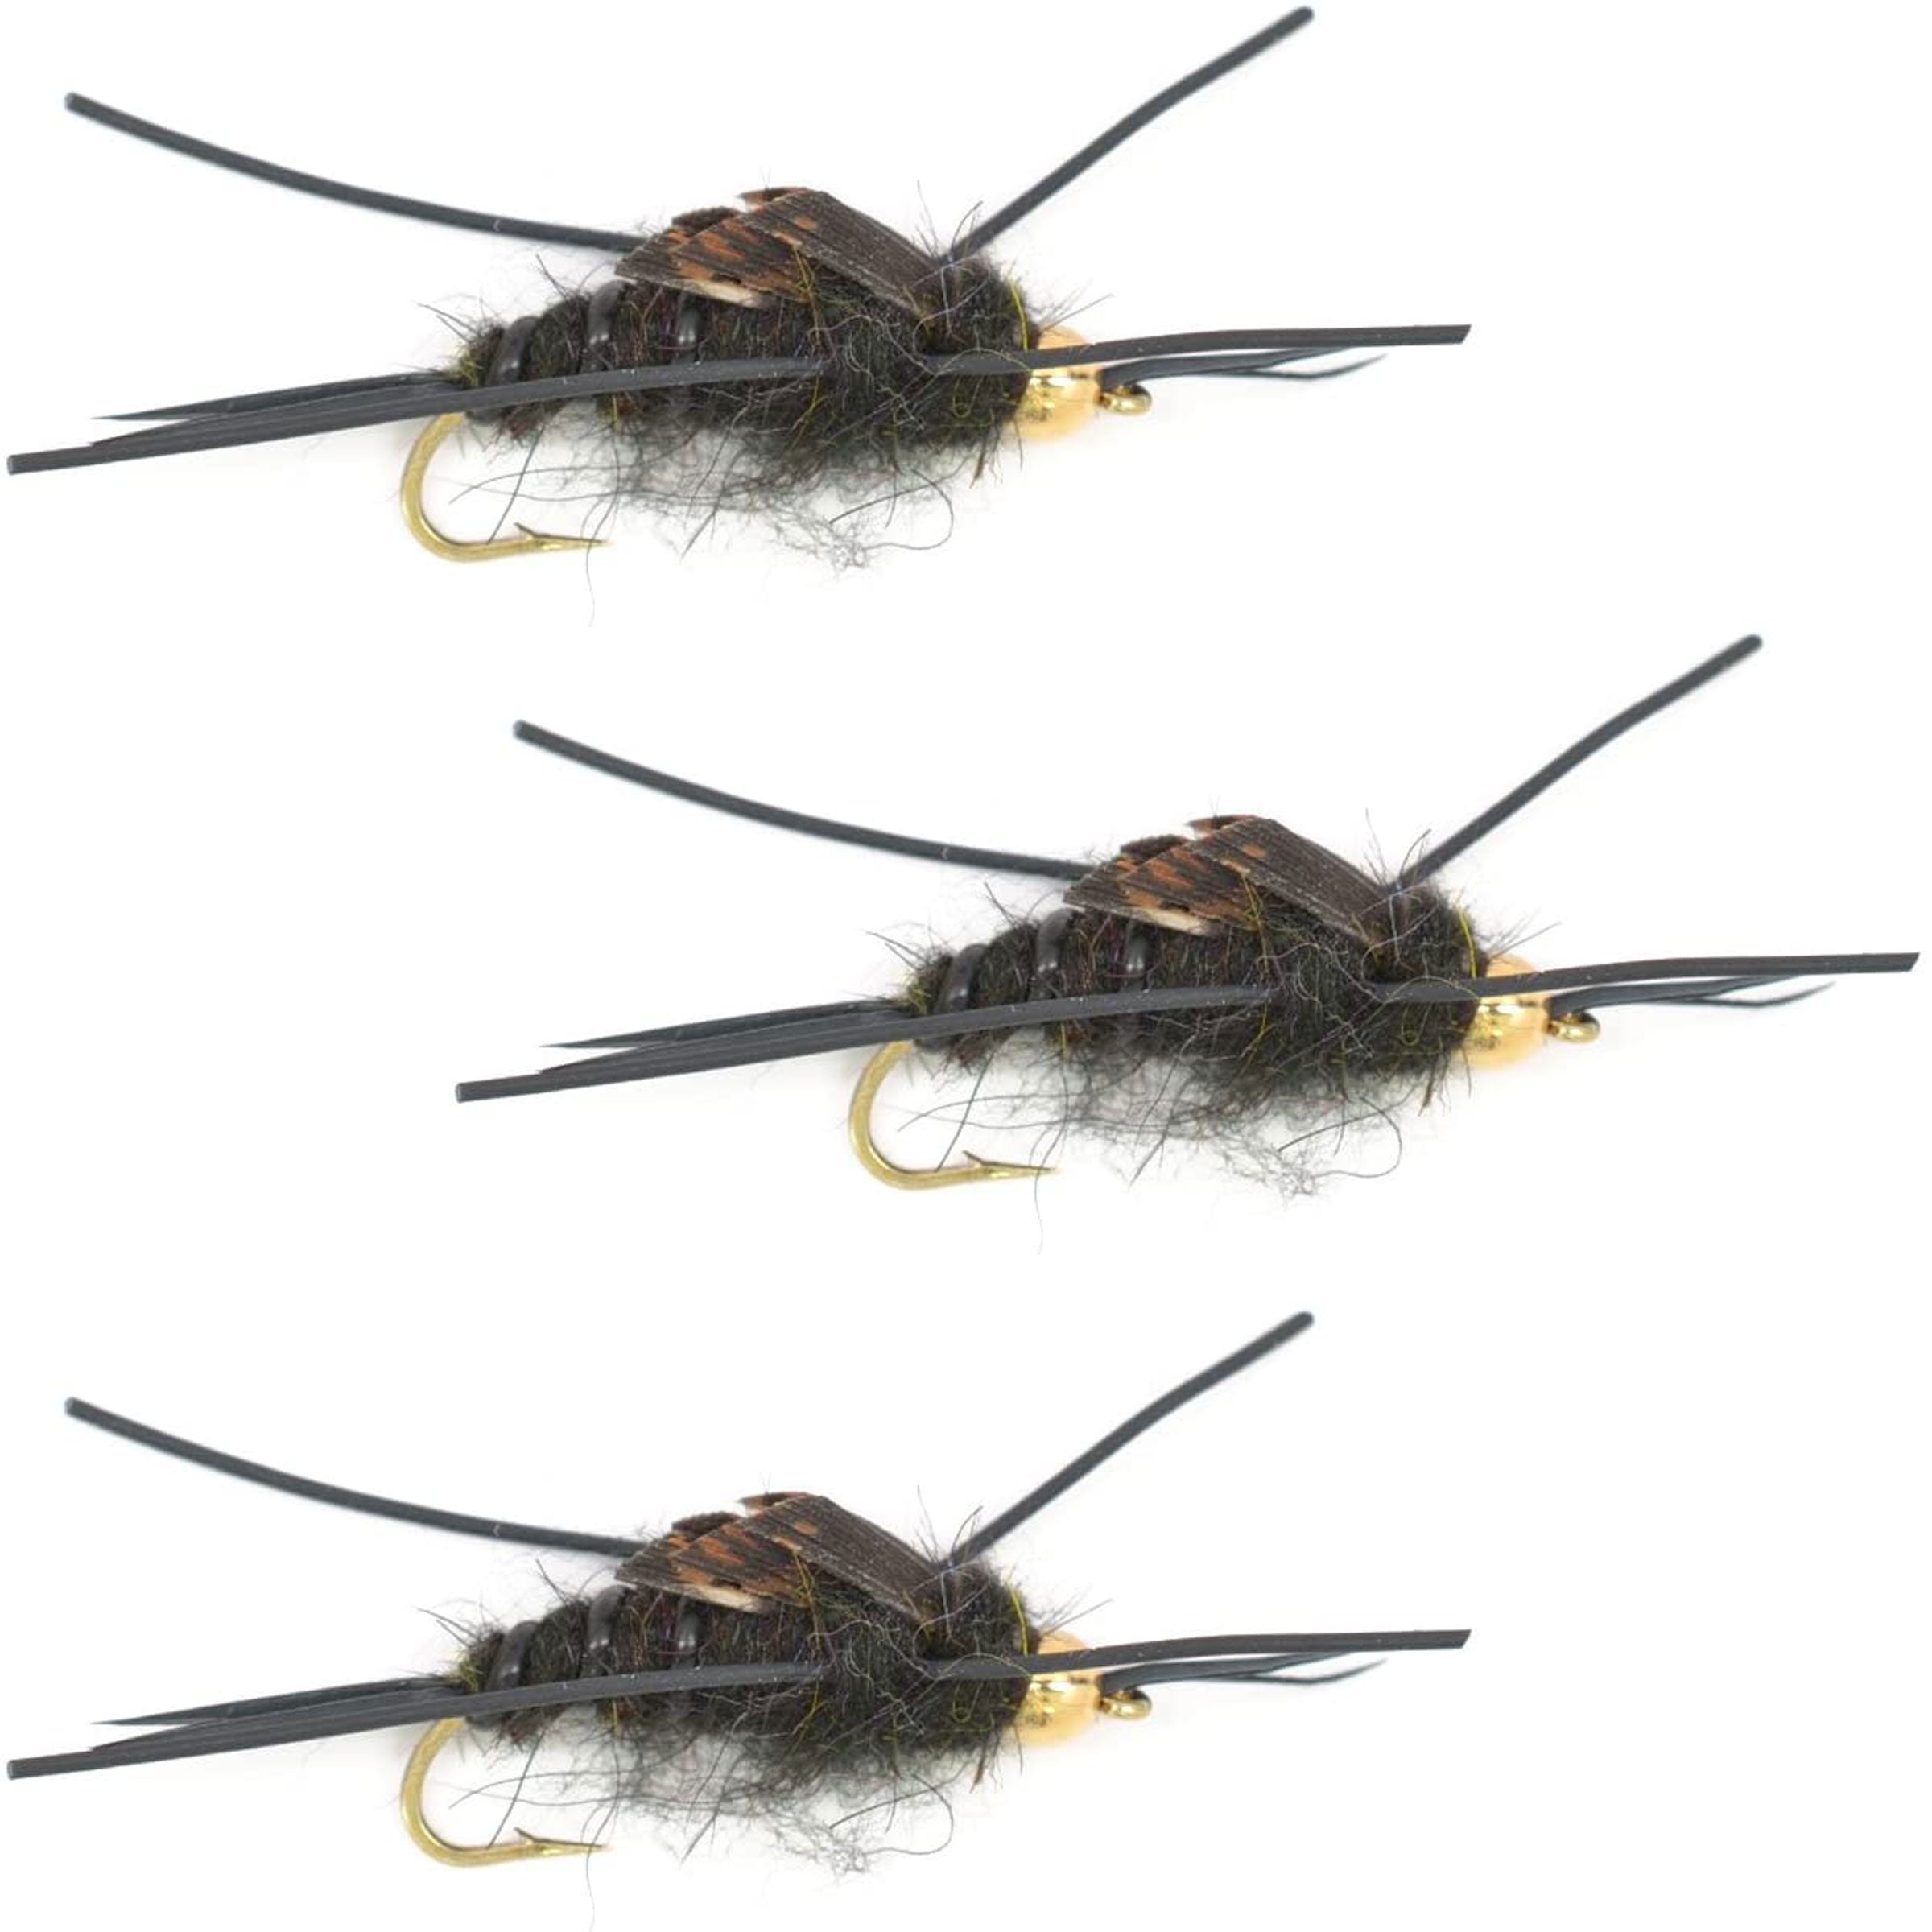 3 Pack Tungsten Bead Kaufmann's Black Stone Fly with Rubber Legs - Stonefly Wet Fly - Hook Size 8